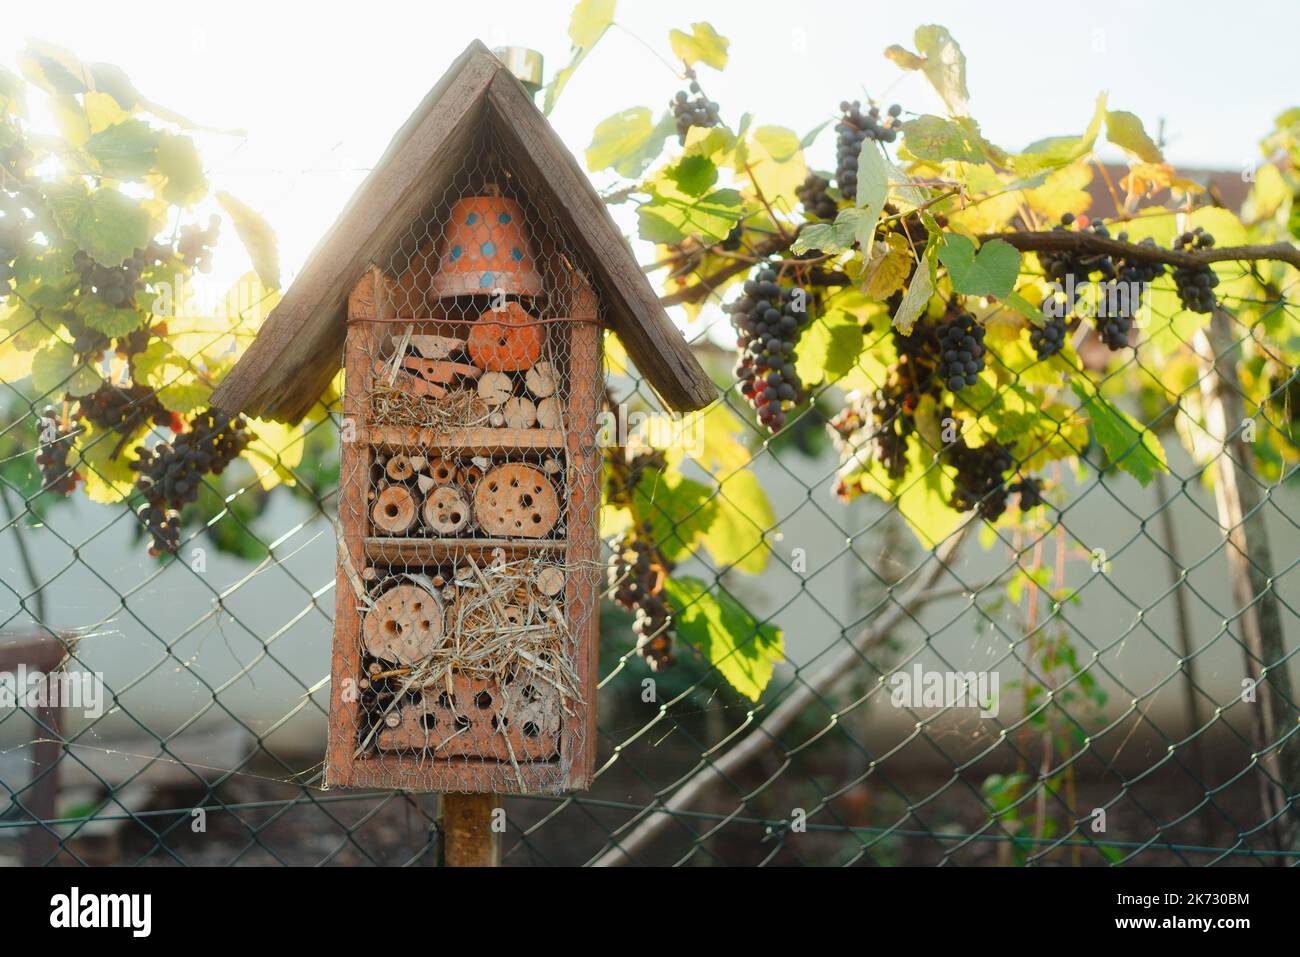 Insect house hanging in the garden, concept of ecology gardening and sustainable lifestyle. Stock Photo